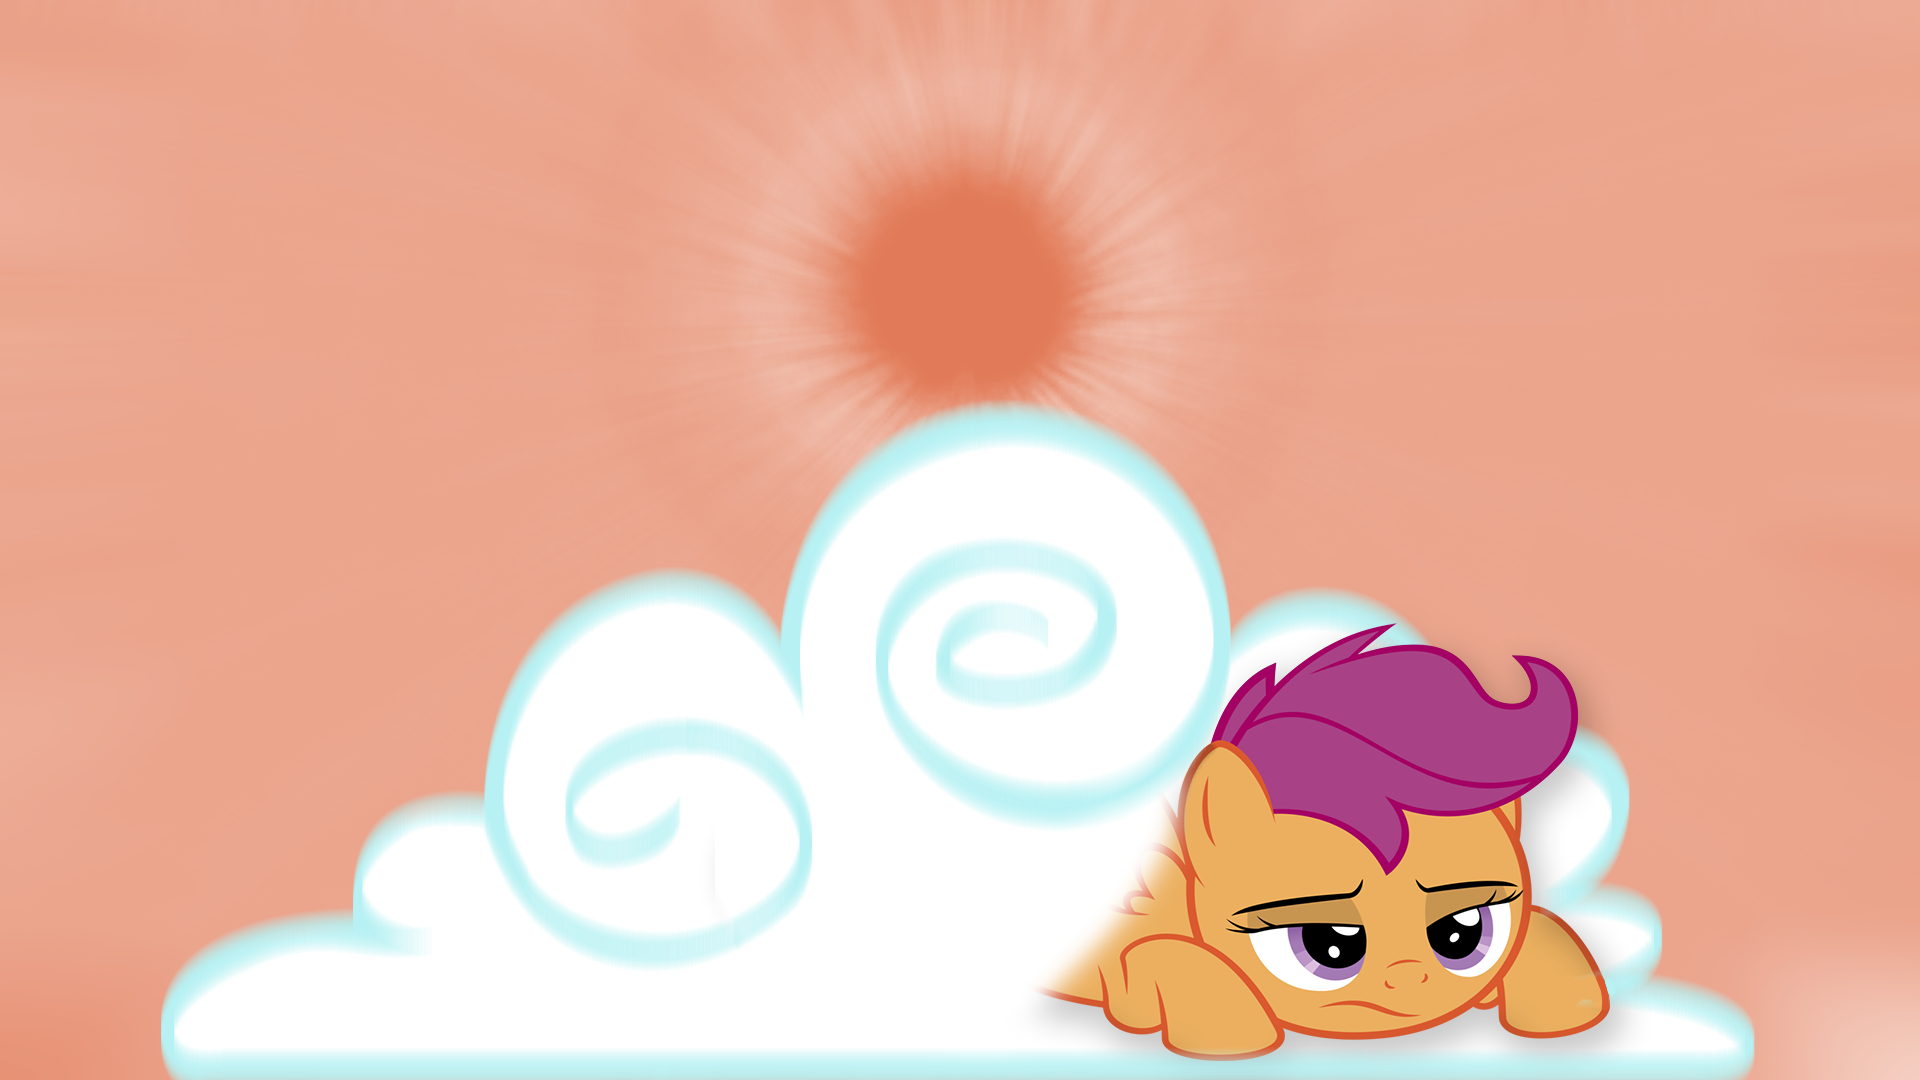 Scootaloo Wallpaper by Couth-Kancerous, GuruGrendo and tgolyi